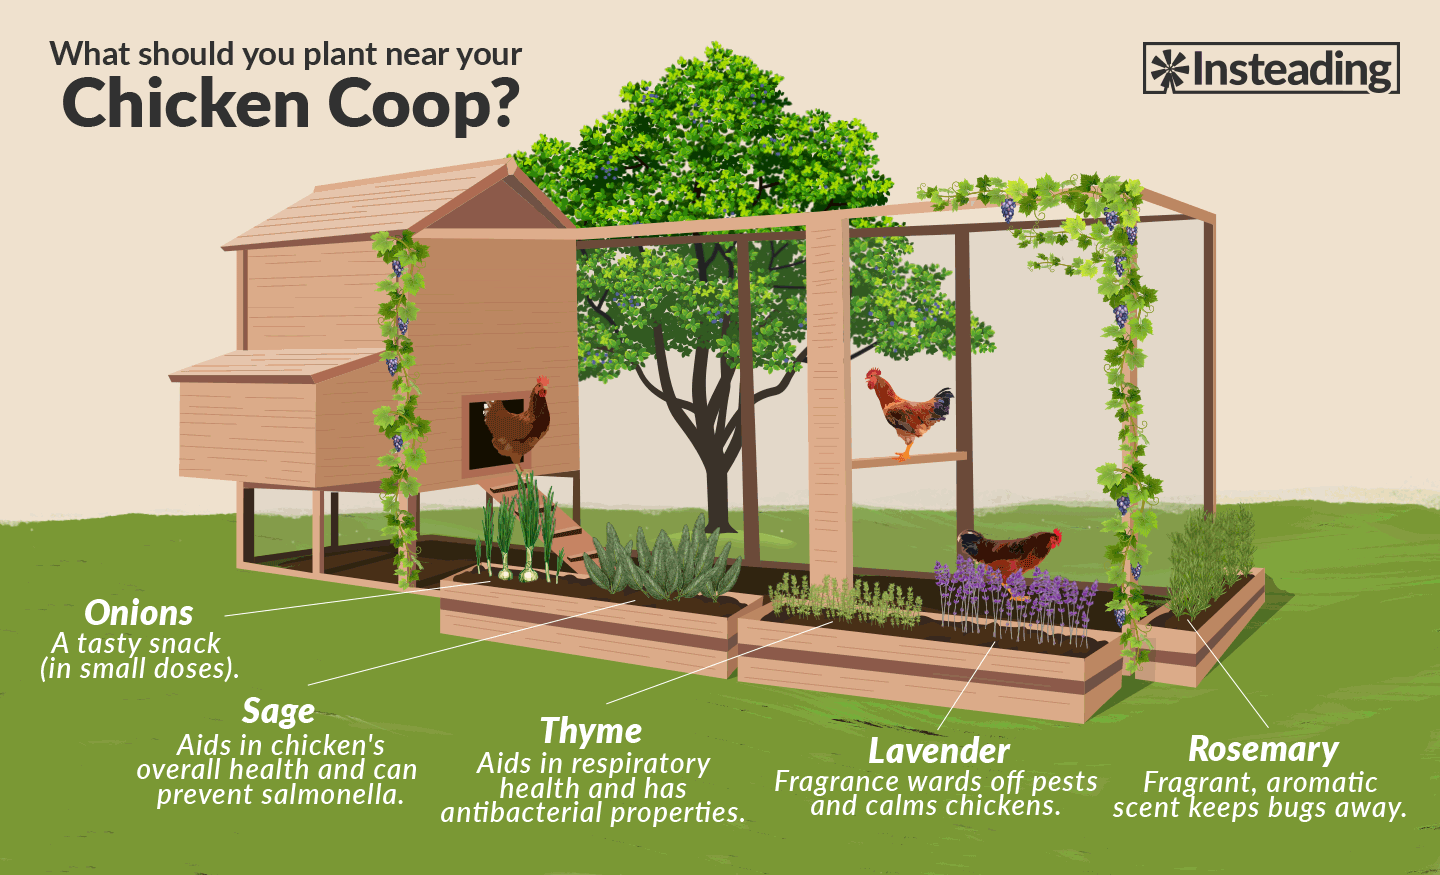 12 Chicken Friendly Plants To Grow Next To Coops • Insteading